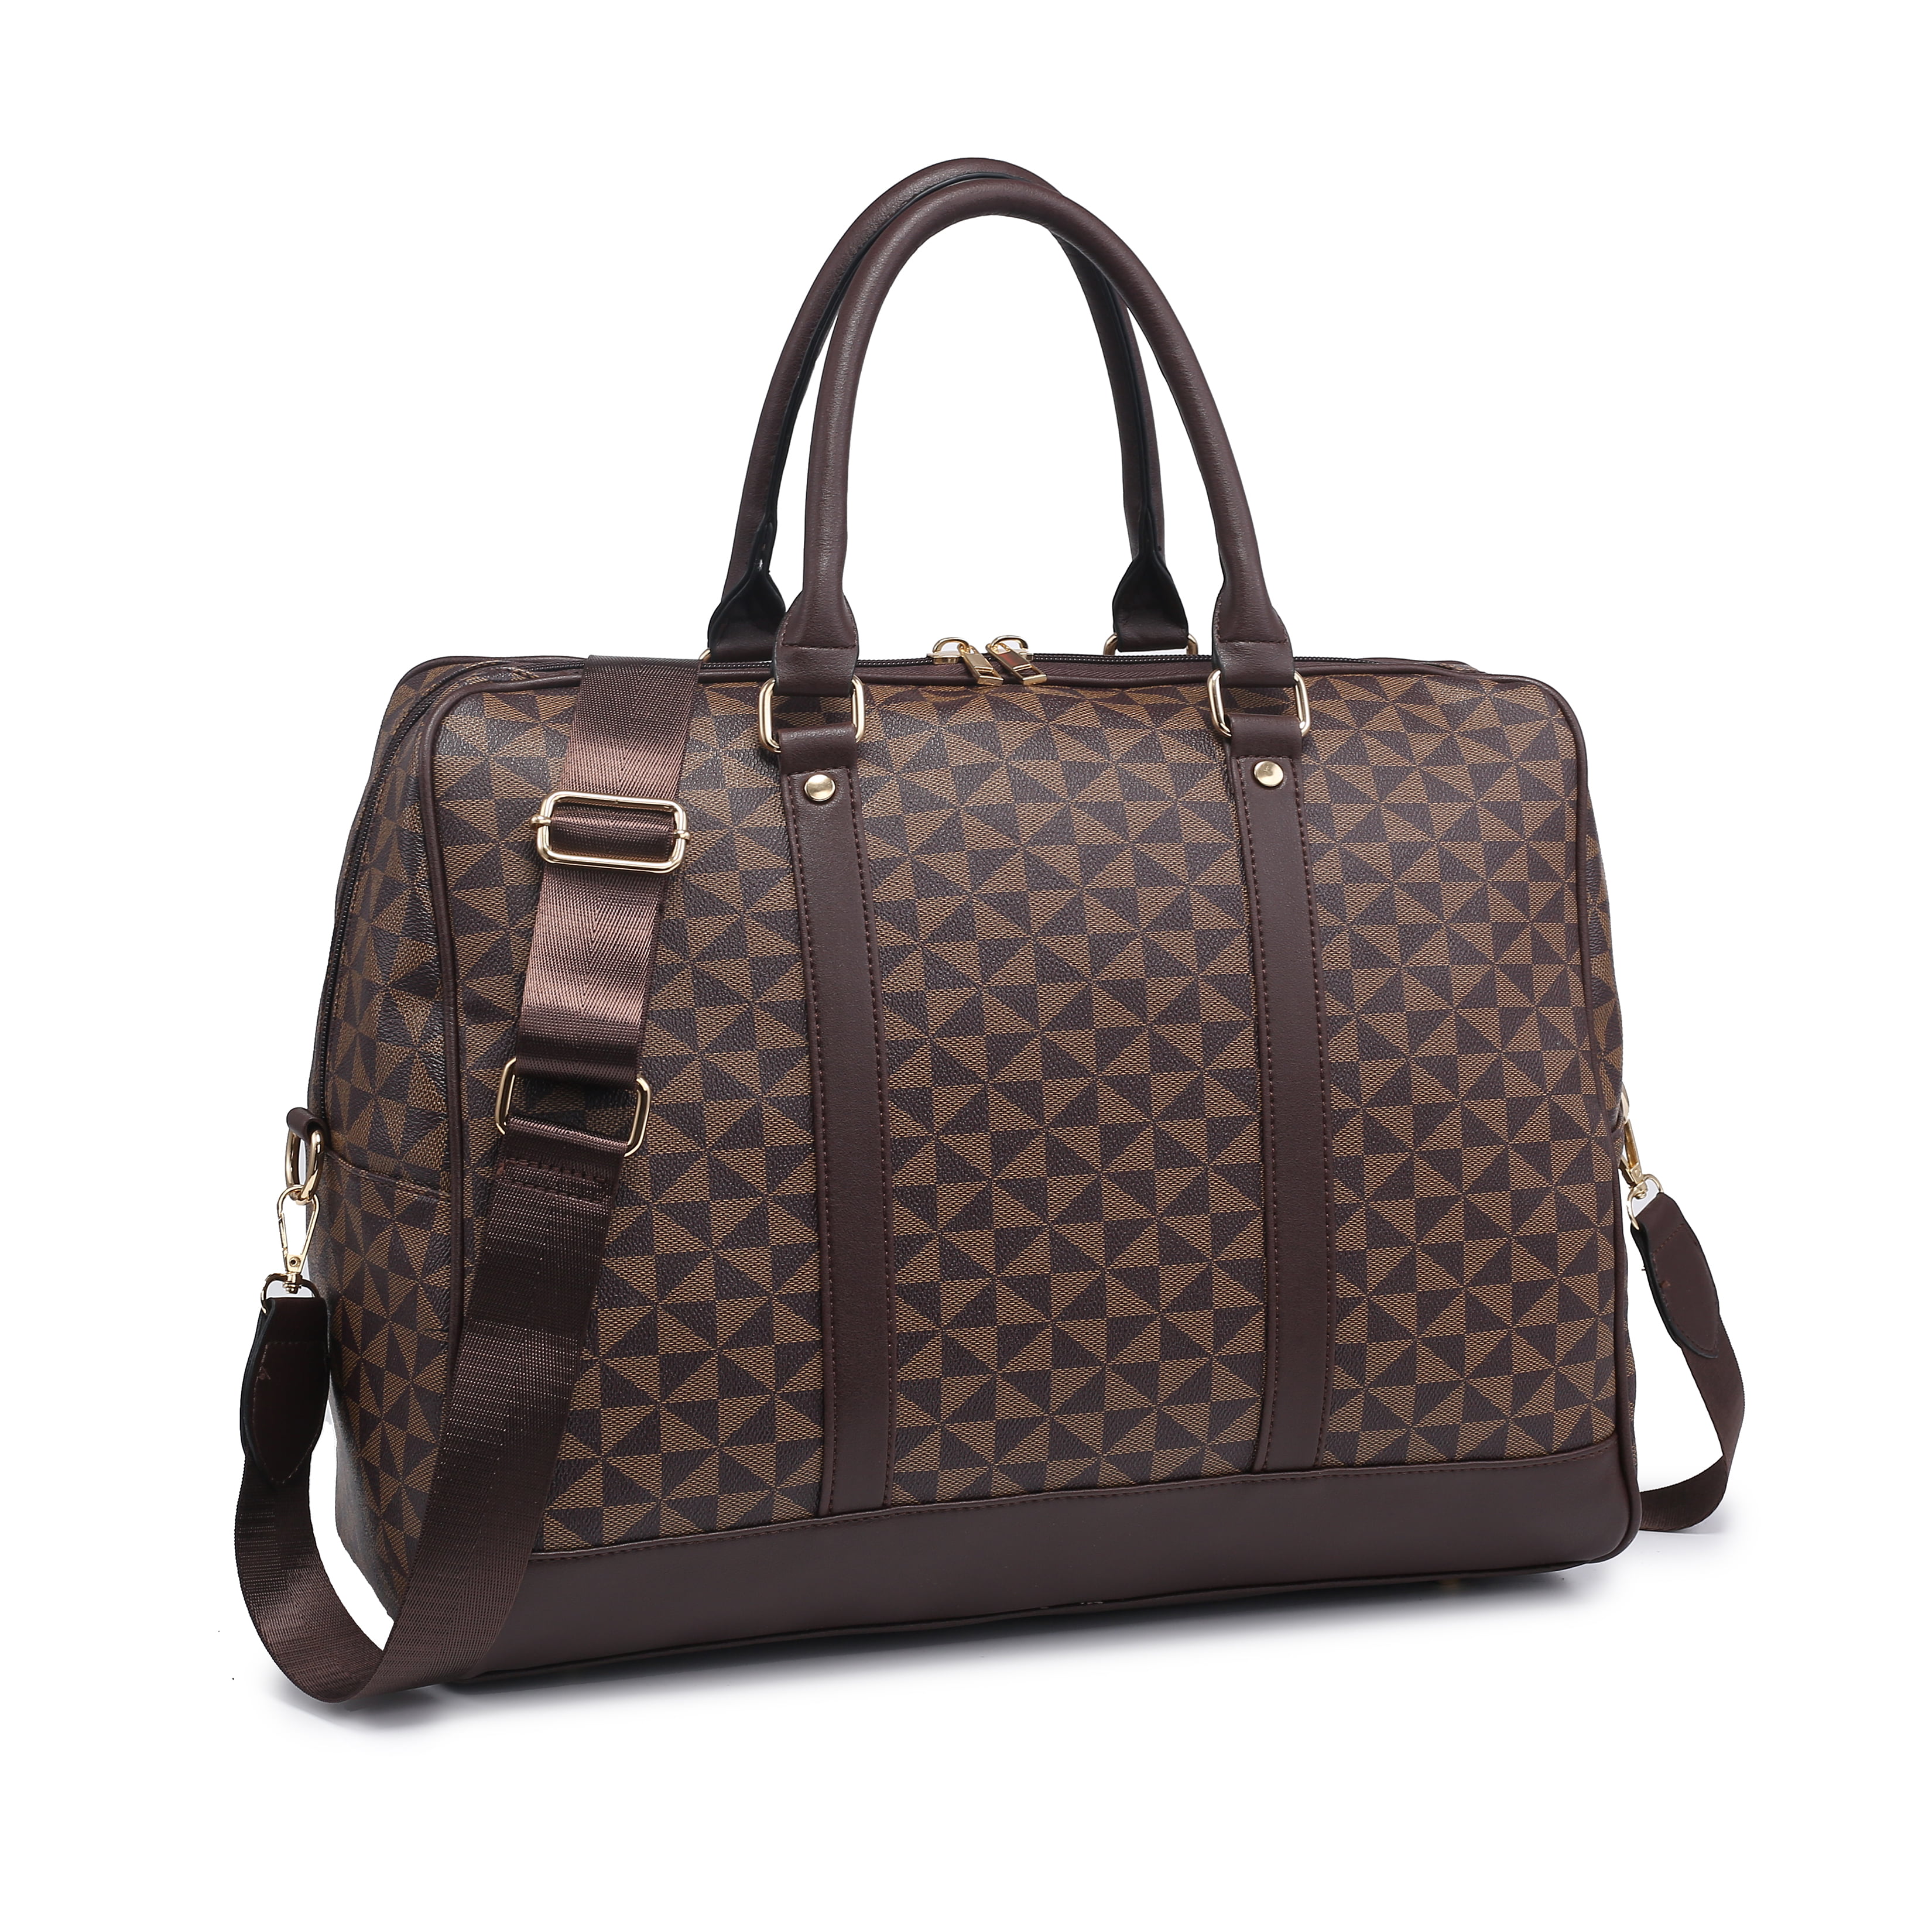 Unisex Duffle bag Personalised Brown PU Leather travel bag Bags & Purses Luggage & Travel Duffel Bags Overnight Holdall 